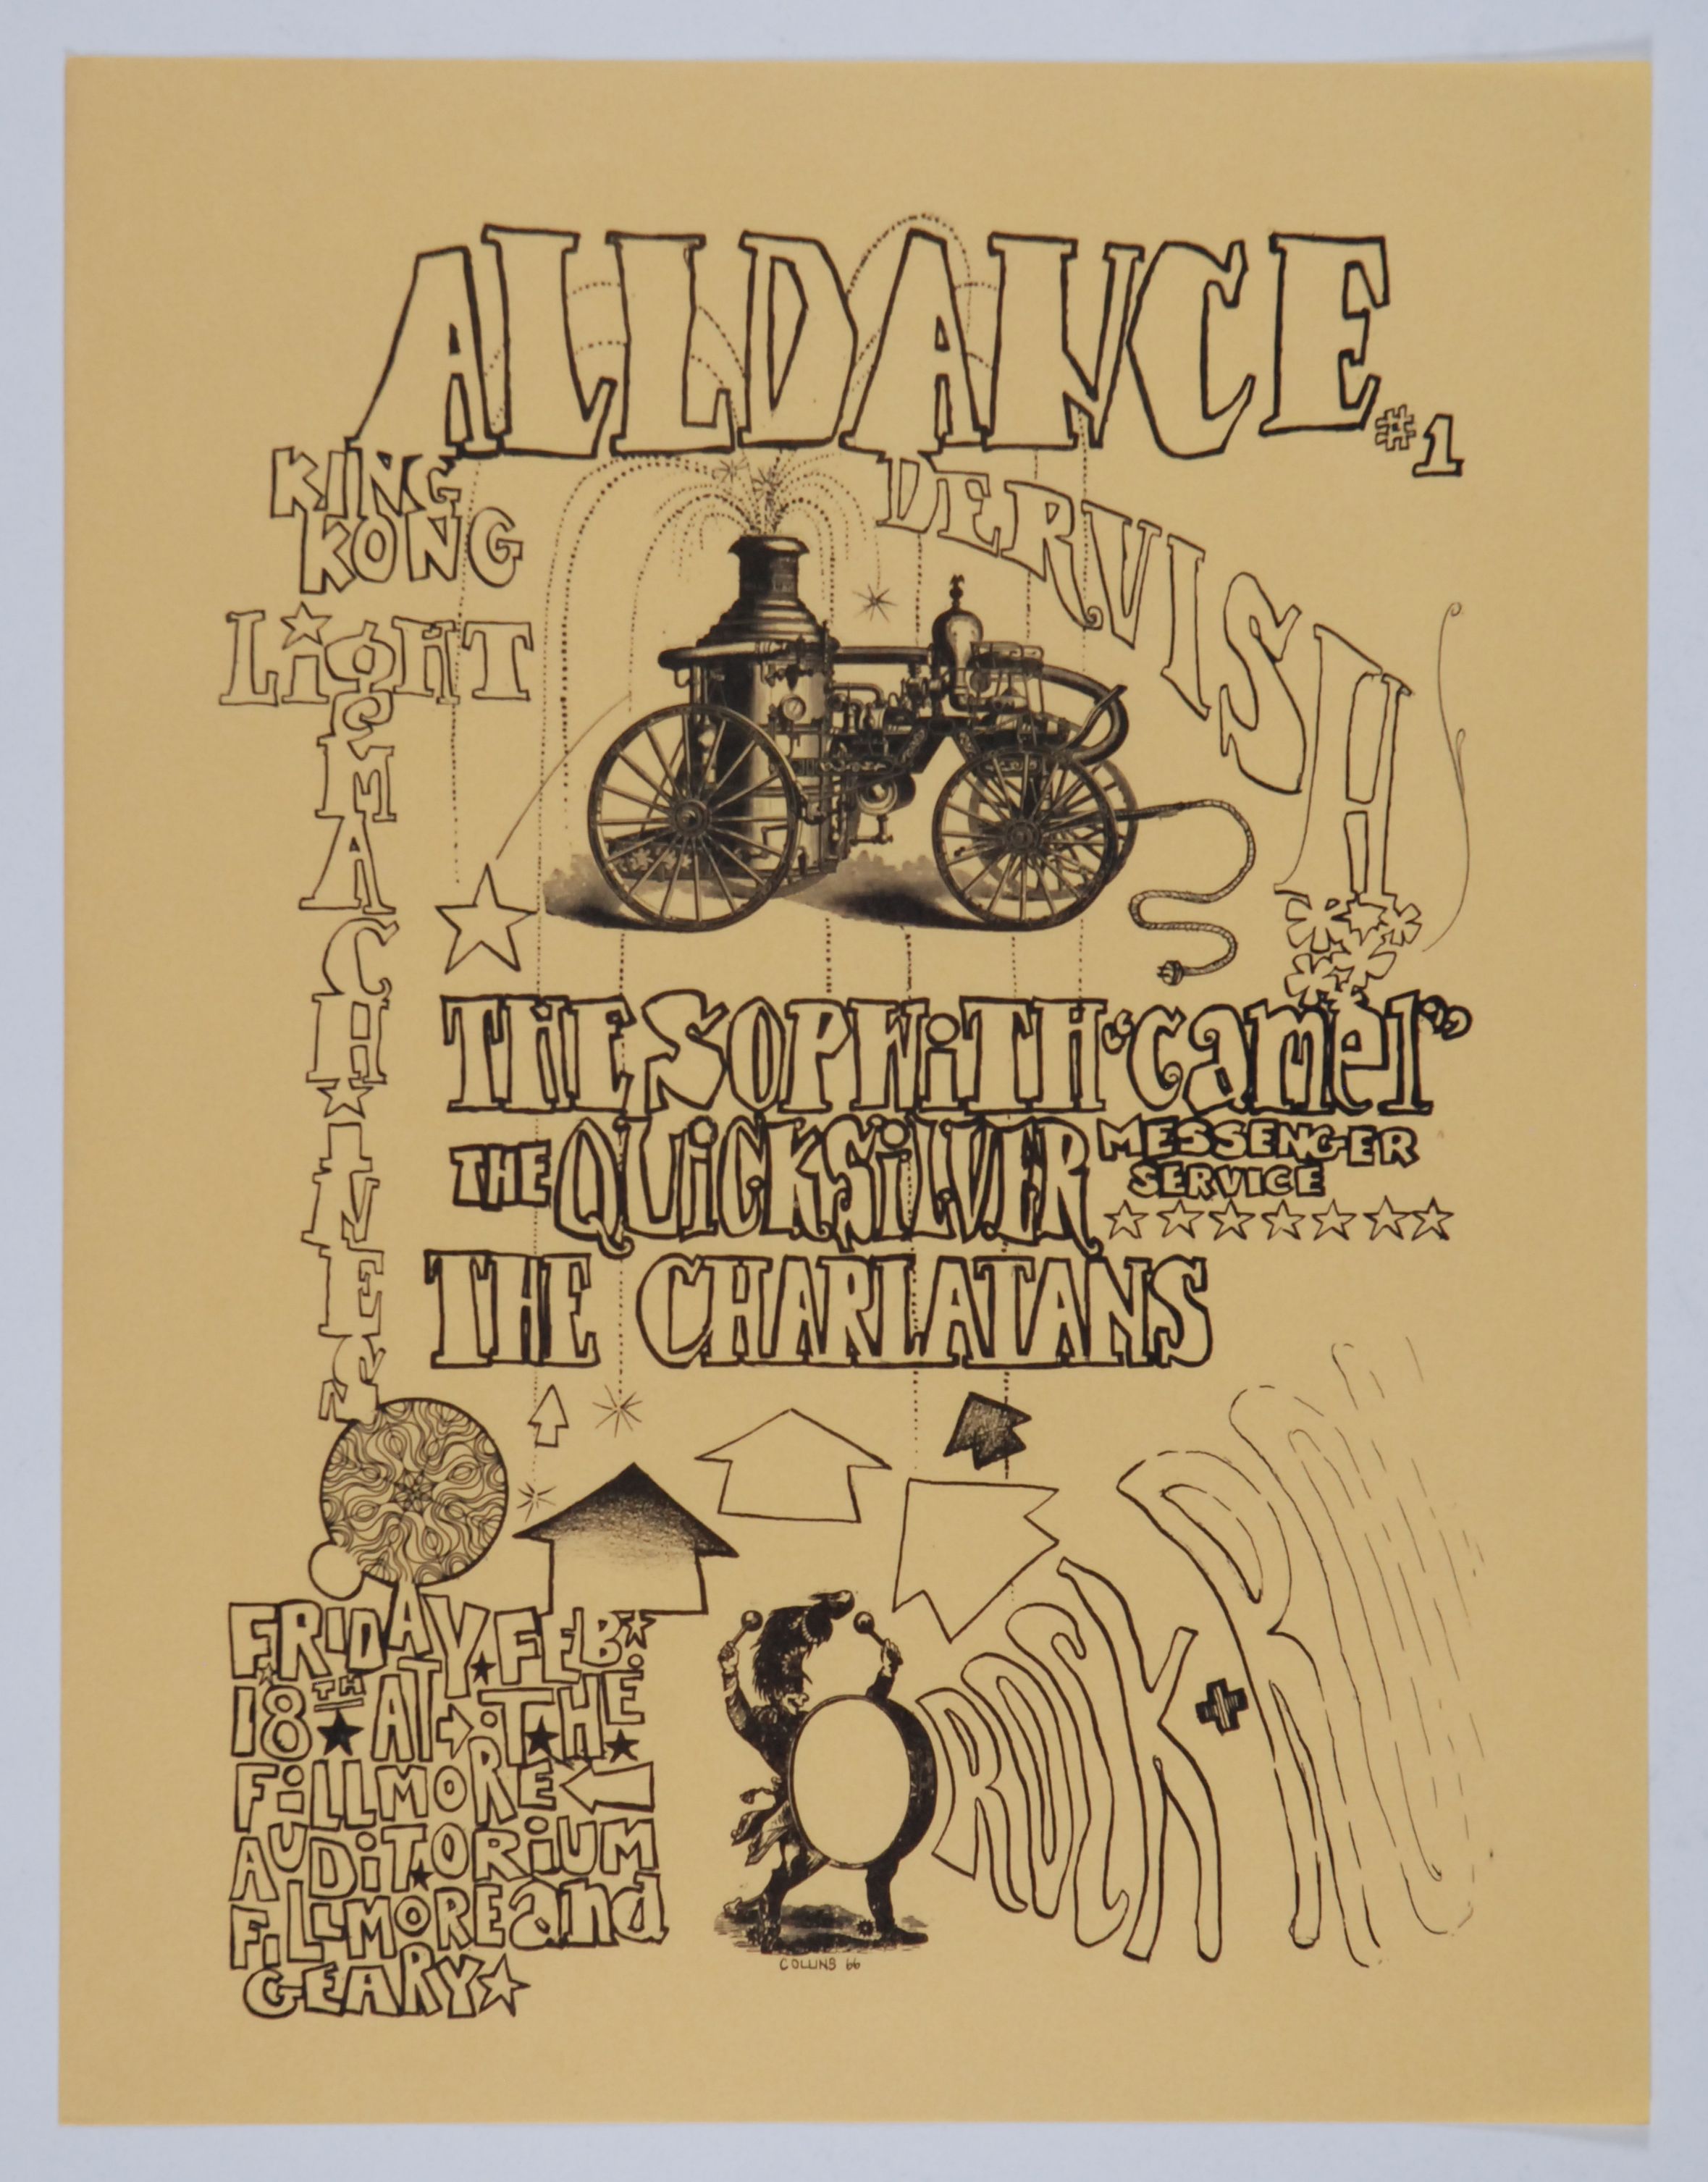 The Charlatans at Fillmore Auditorium - All Dance #1 1966 Concert Poster